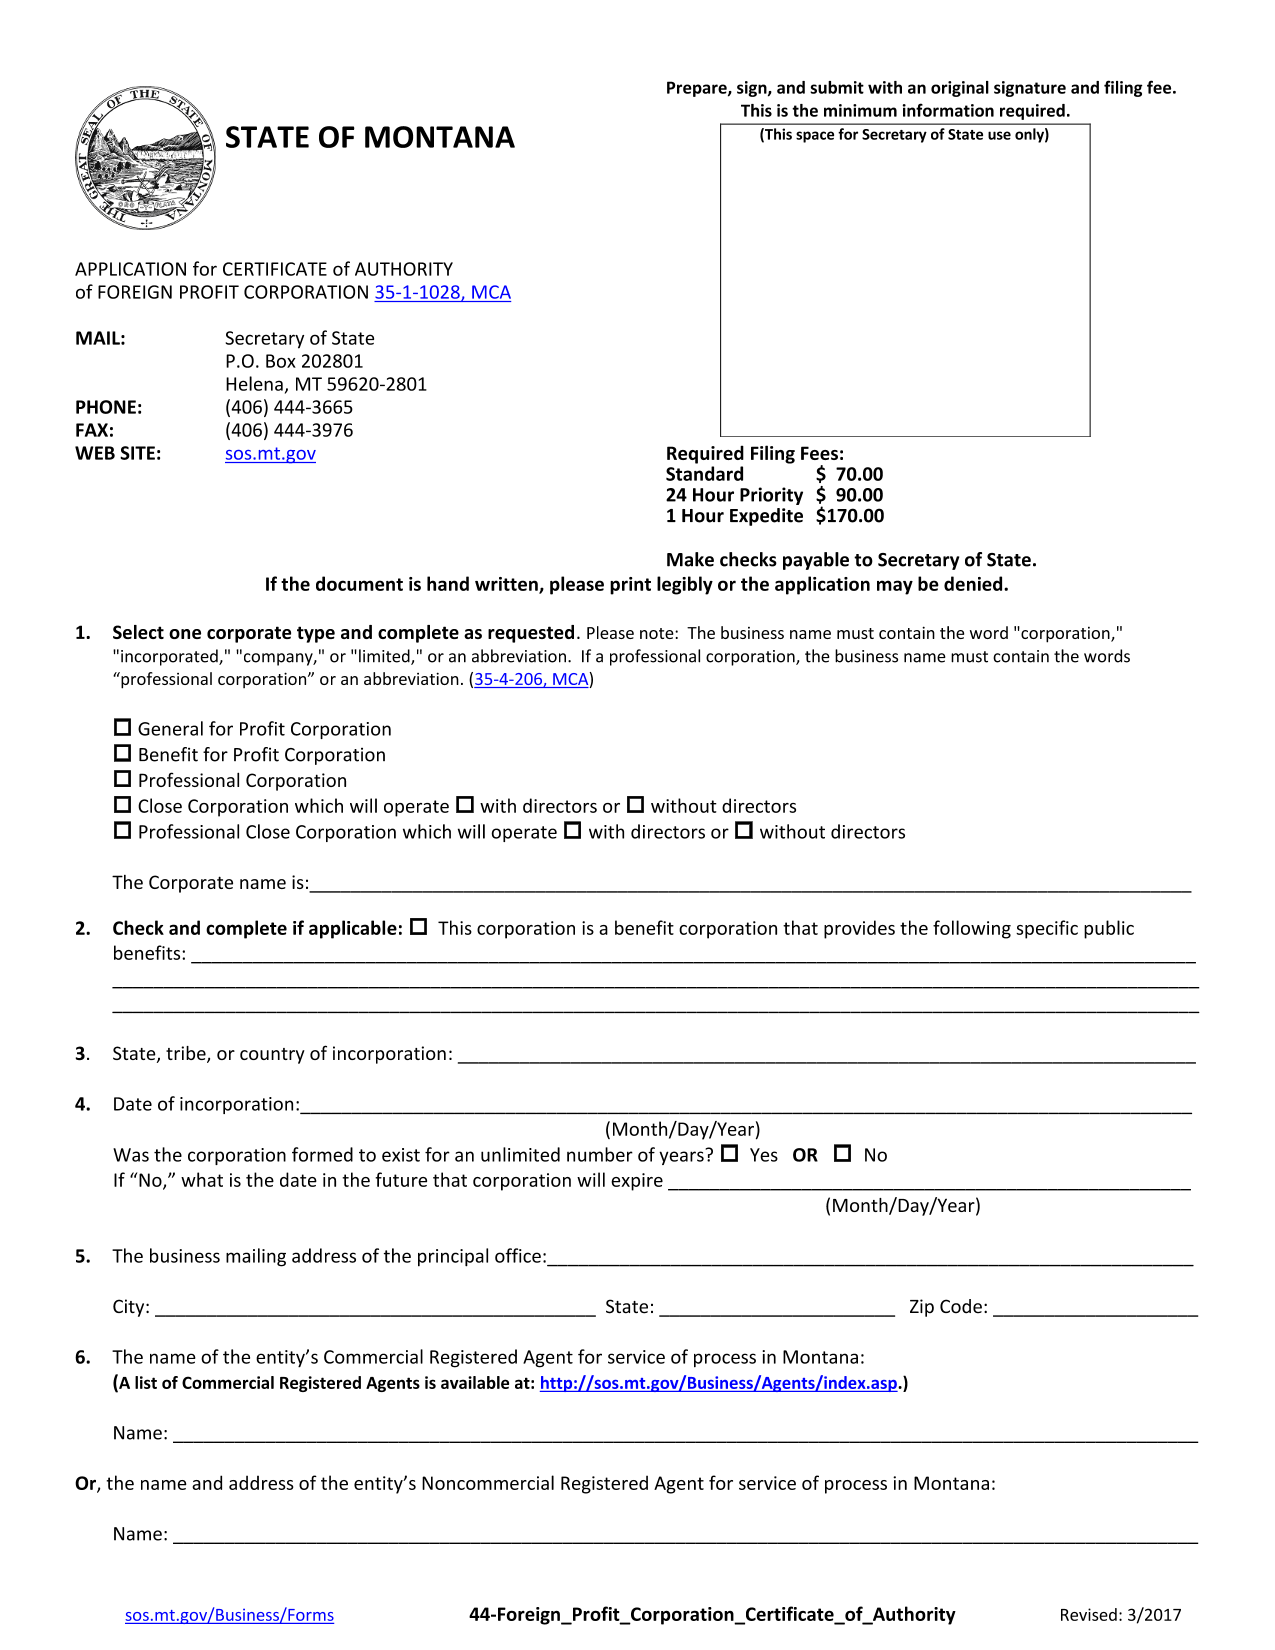 montana-foreign-corporation-certificate-of-authority-application